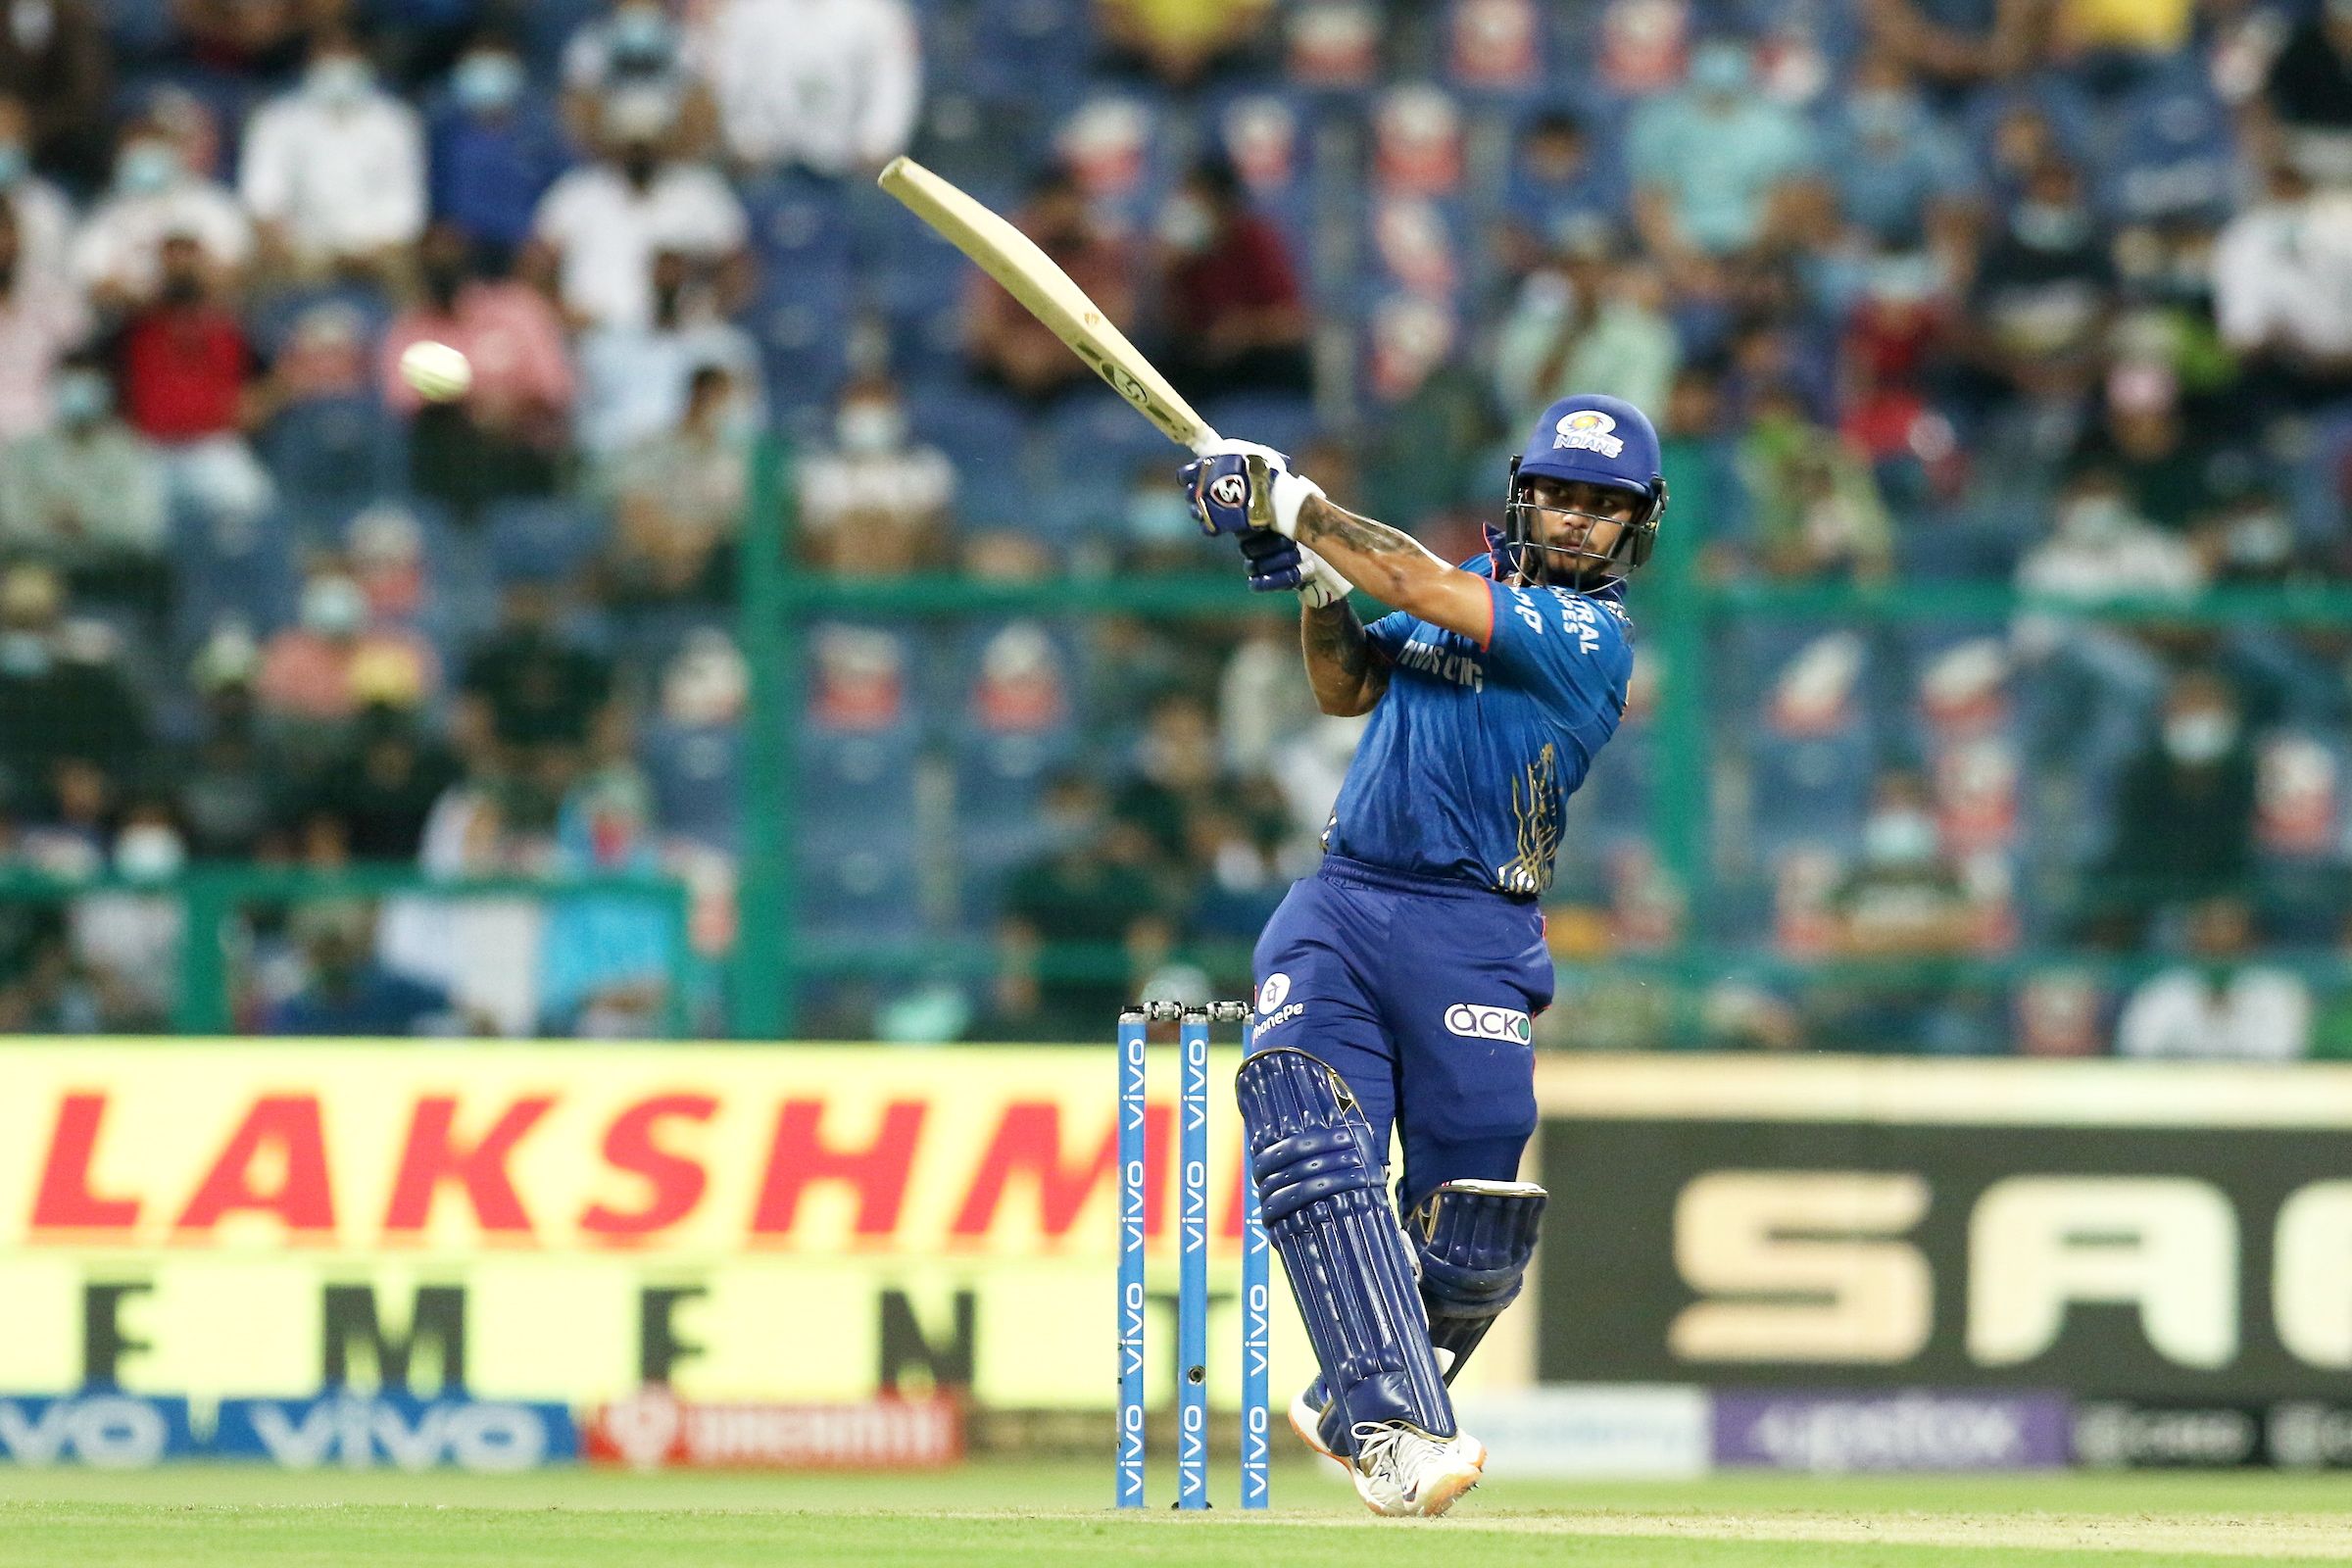 Virat Kohli identifies a new opener for T20 World Cup. Find out who